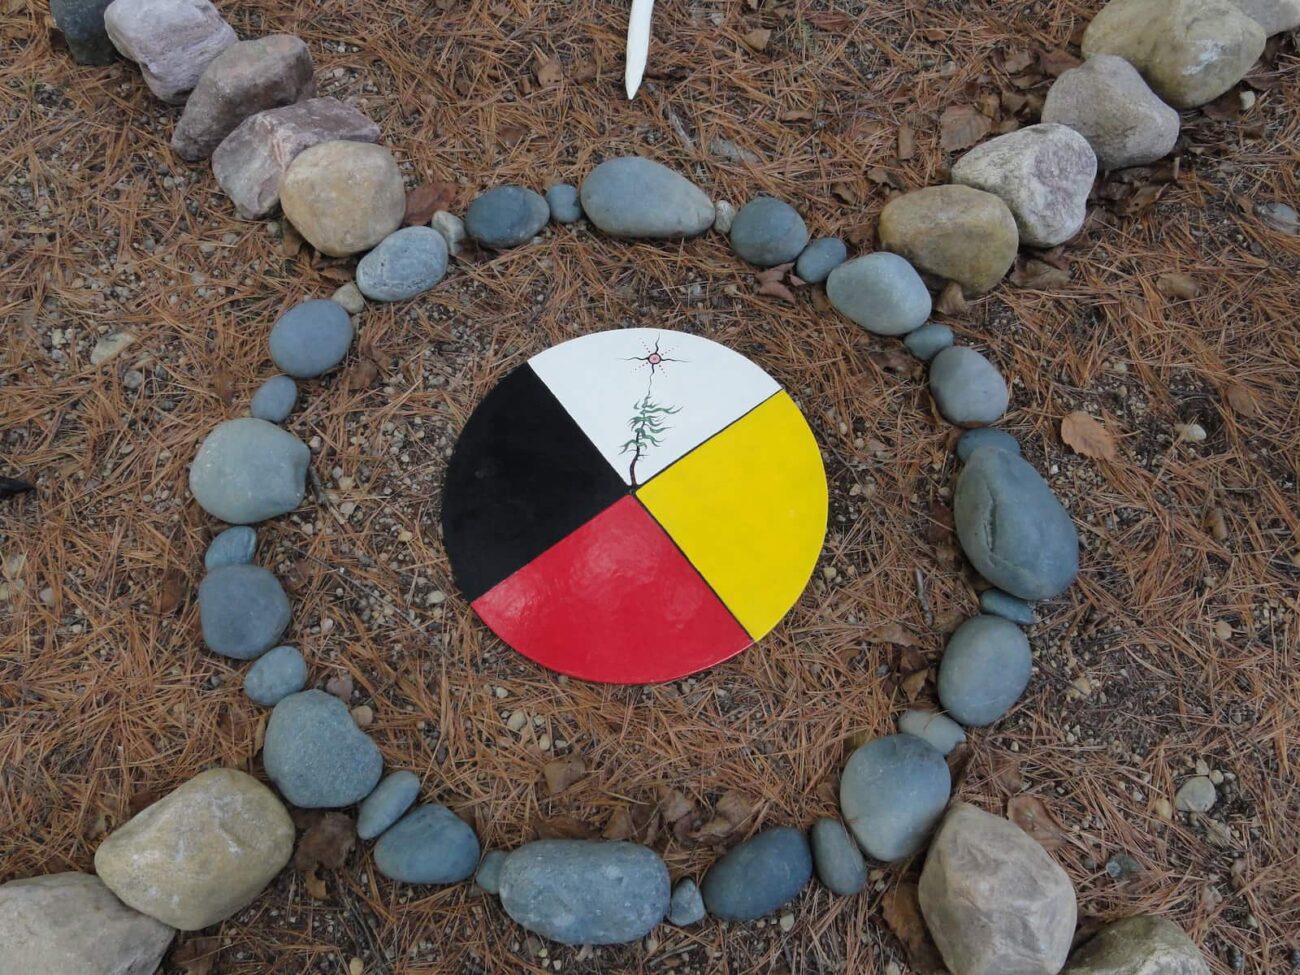 Indigenous communities have been using a medicine wheel for several thousand years. Find out how your overall wellbeing can benefit from the medicine wheel.